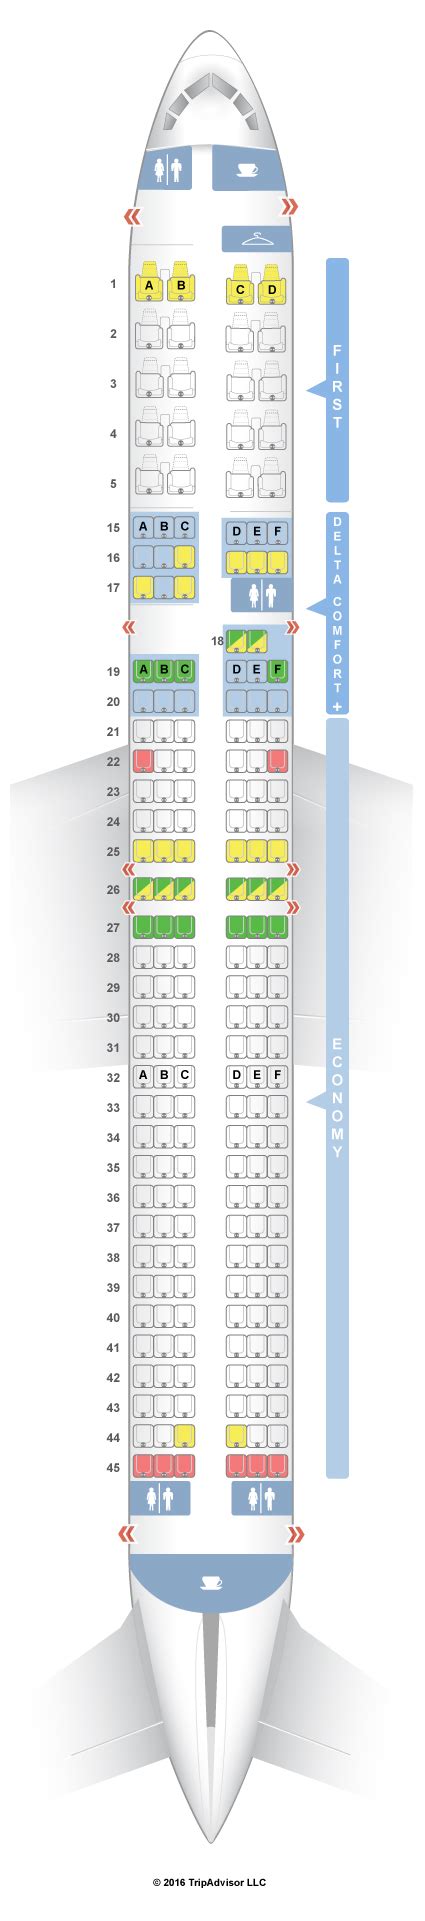 Your guide to Delta seat maps and fleet information, ... Boeing 757-200 (757) 34-35: 17.2: Standard: Overhead TV ... SeatGuru was created to help travelers choose. 